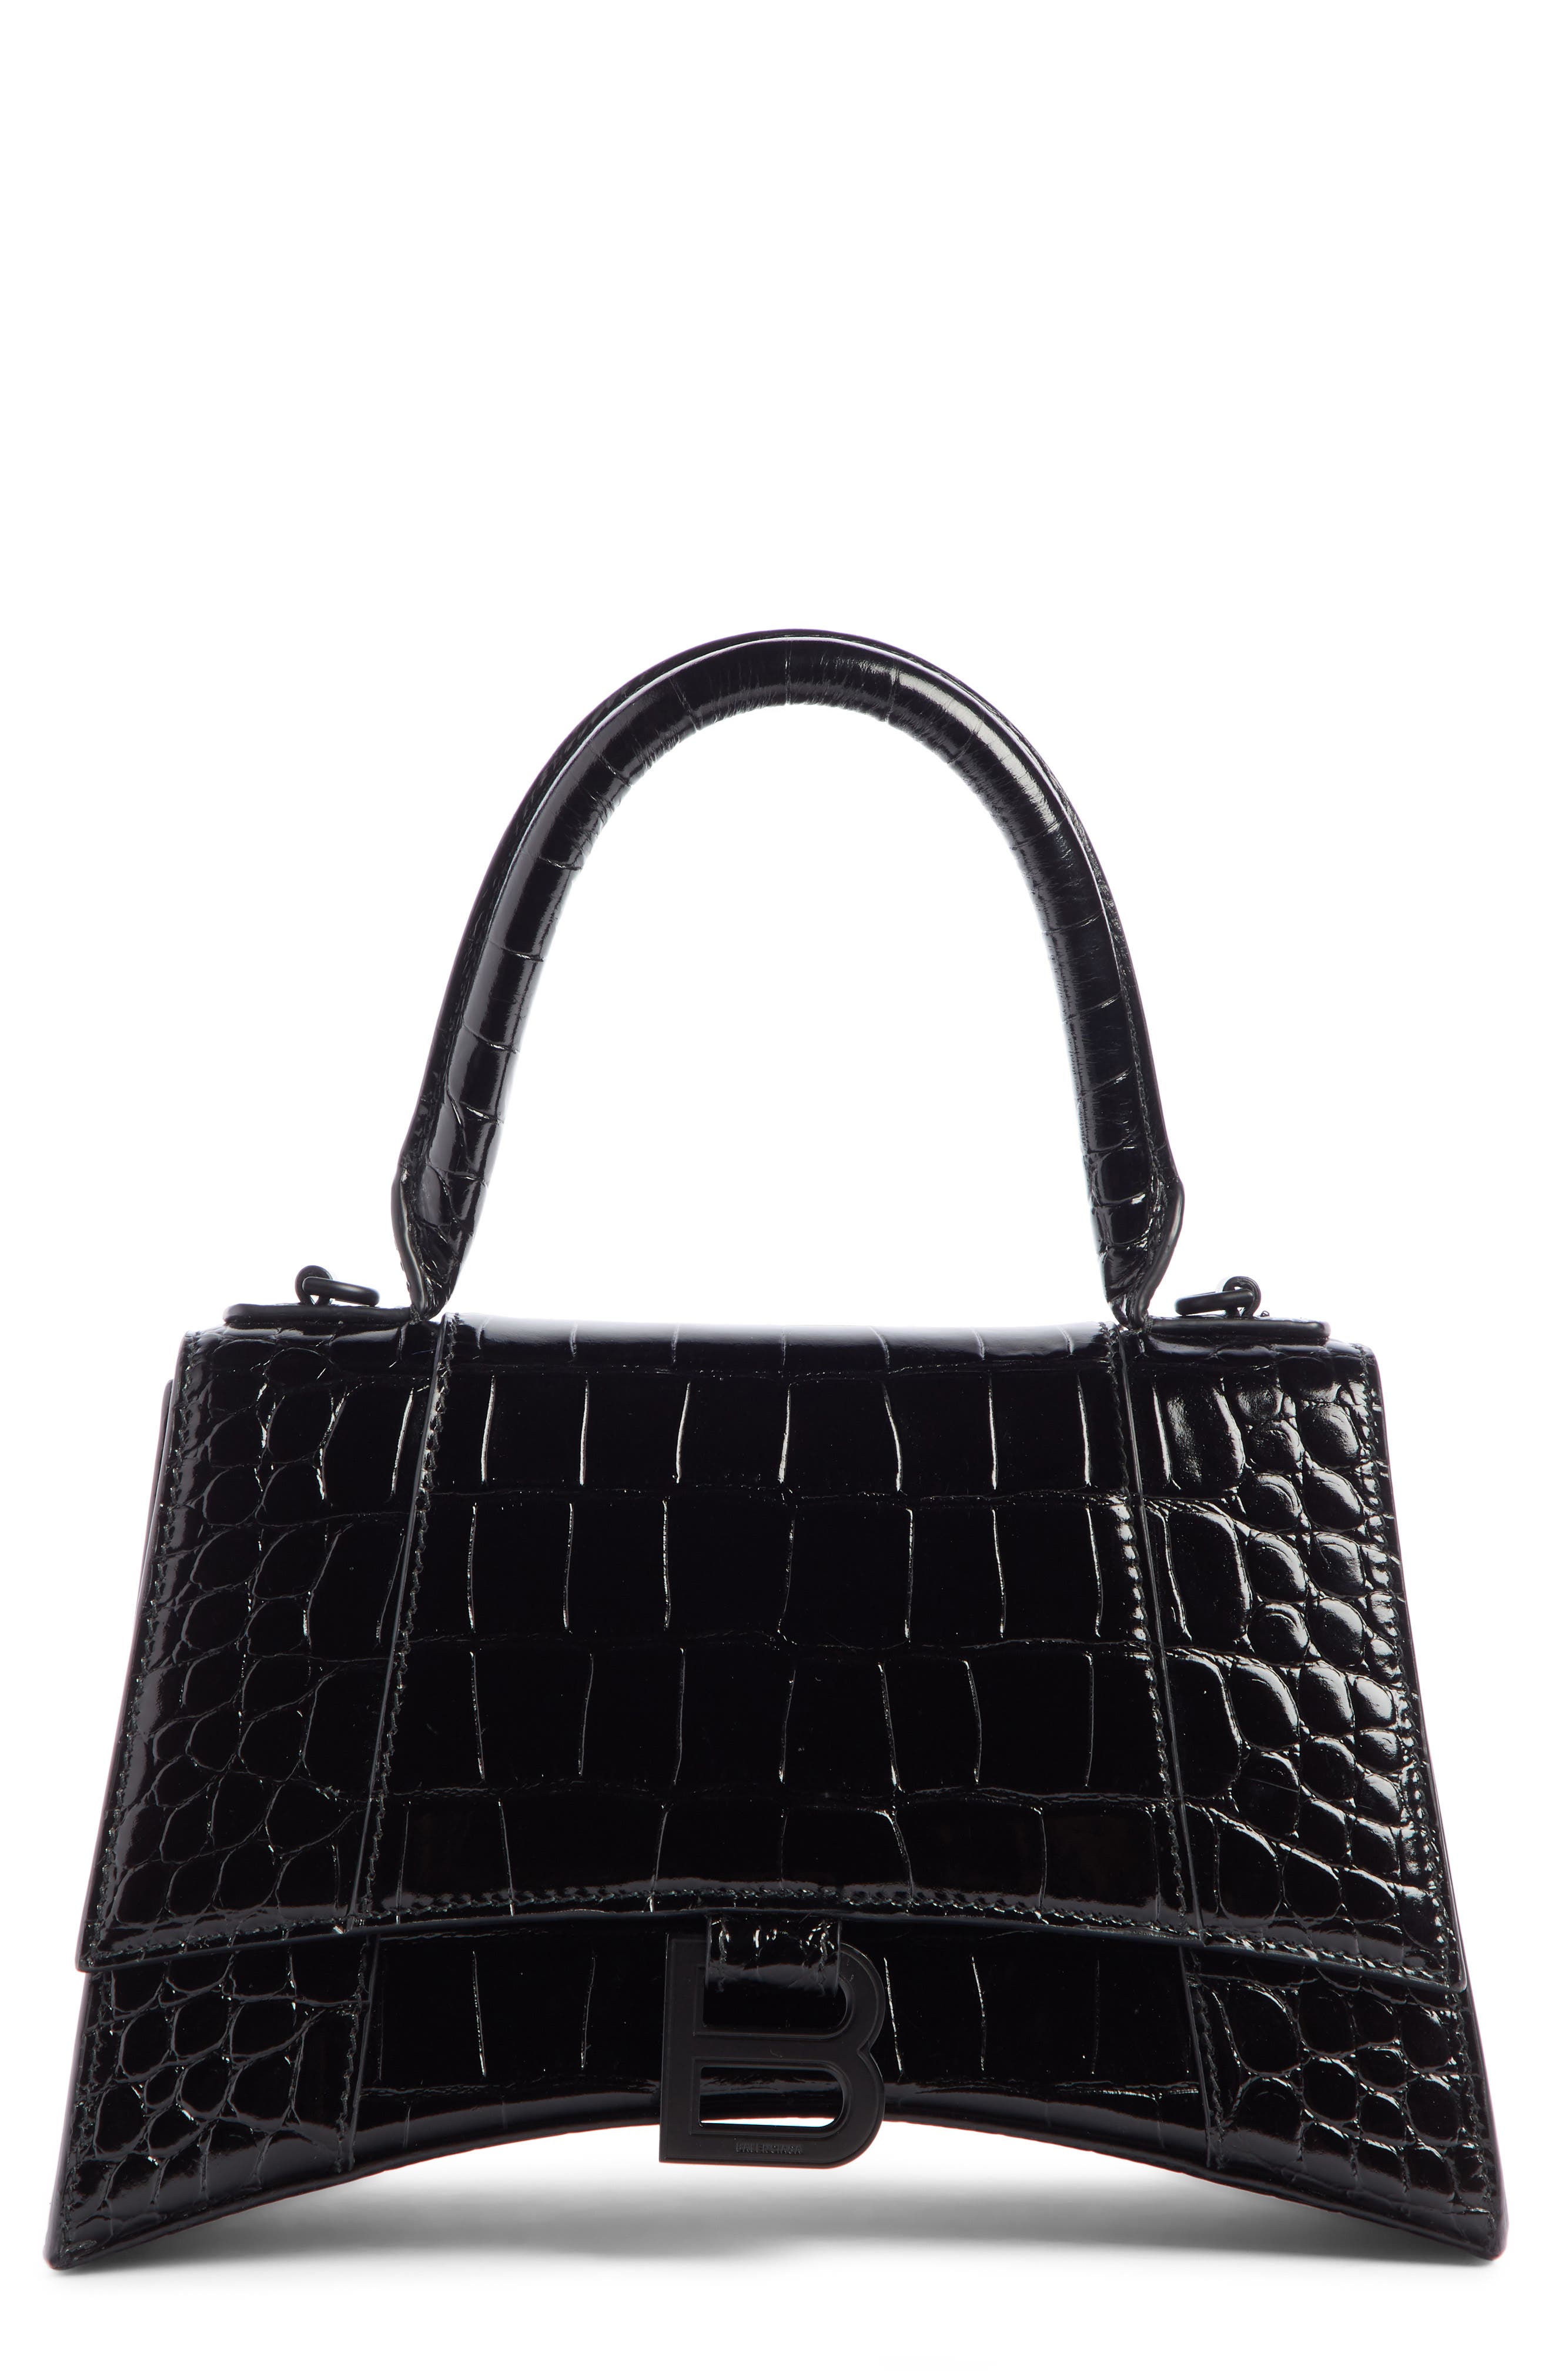 Balenciaga Extra Small Hourglass Croc Embossed Leather Top Handle Bag in Black at Nordstrom